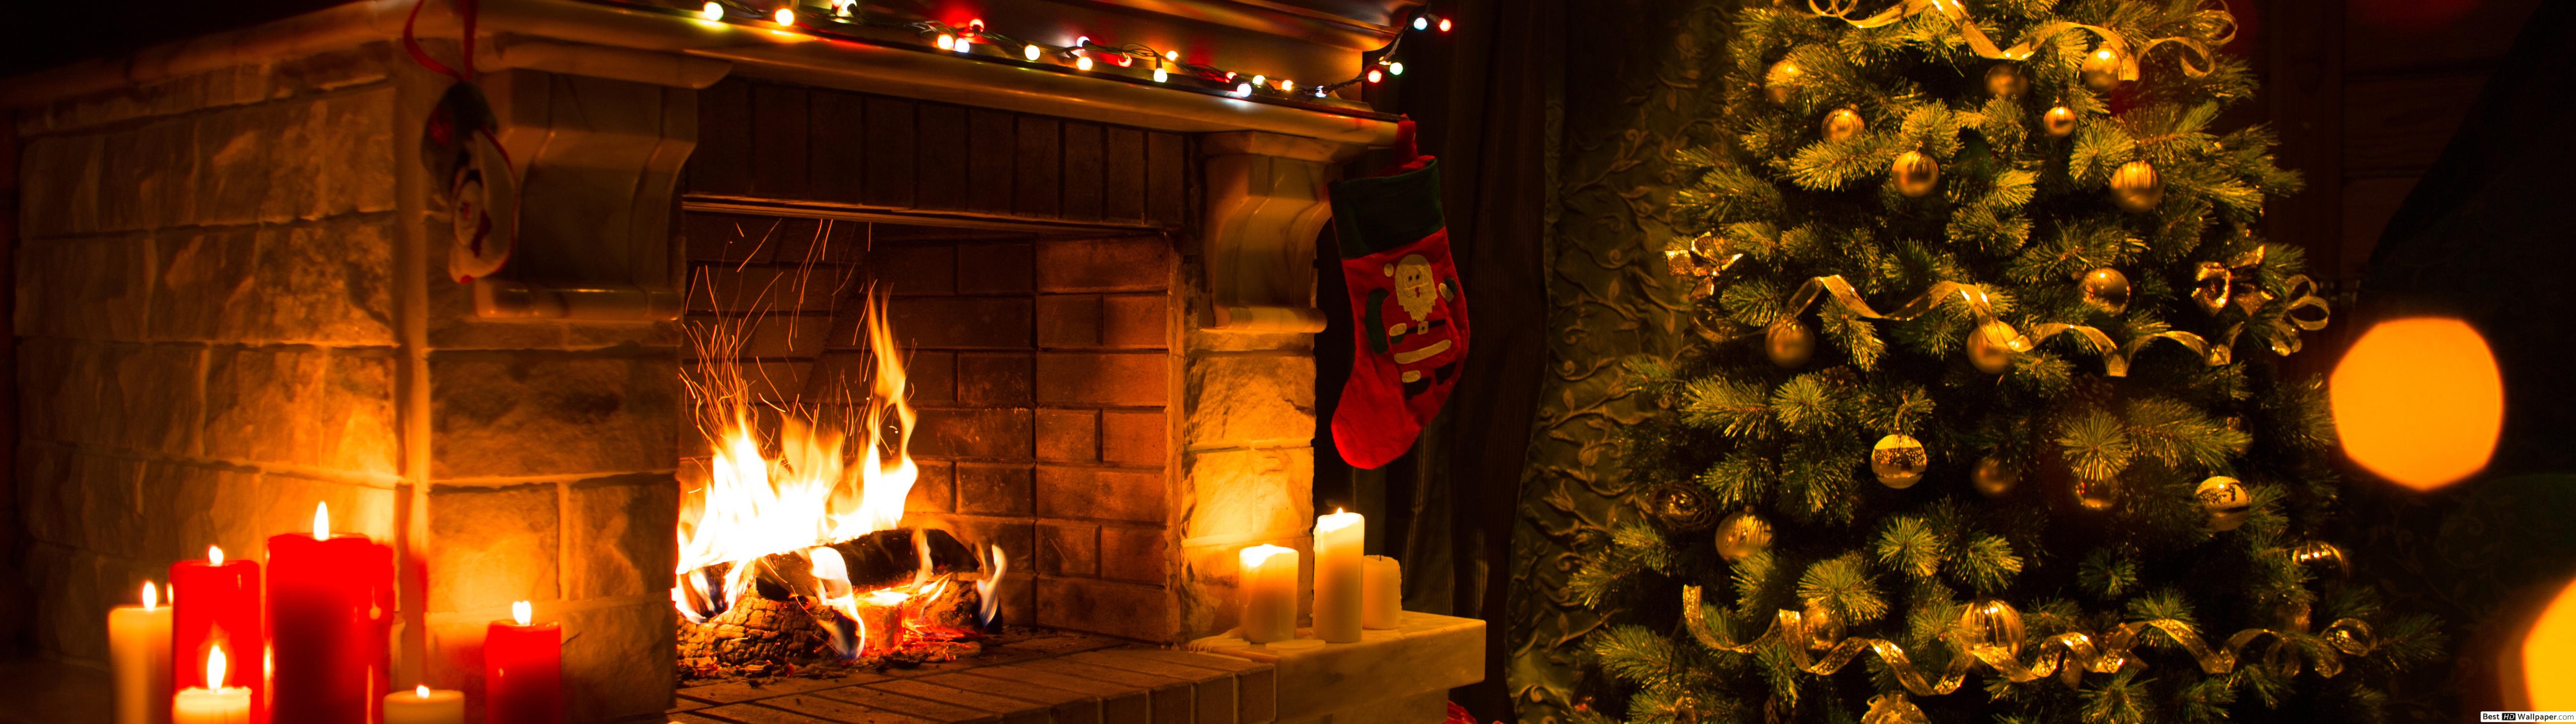 Fireplace and Christmas tree HD wallpaper download